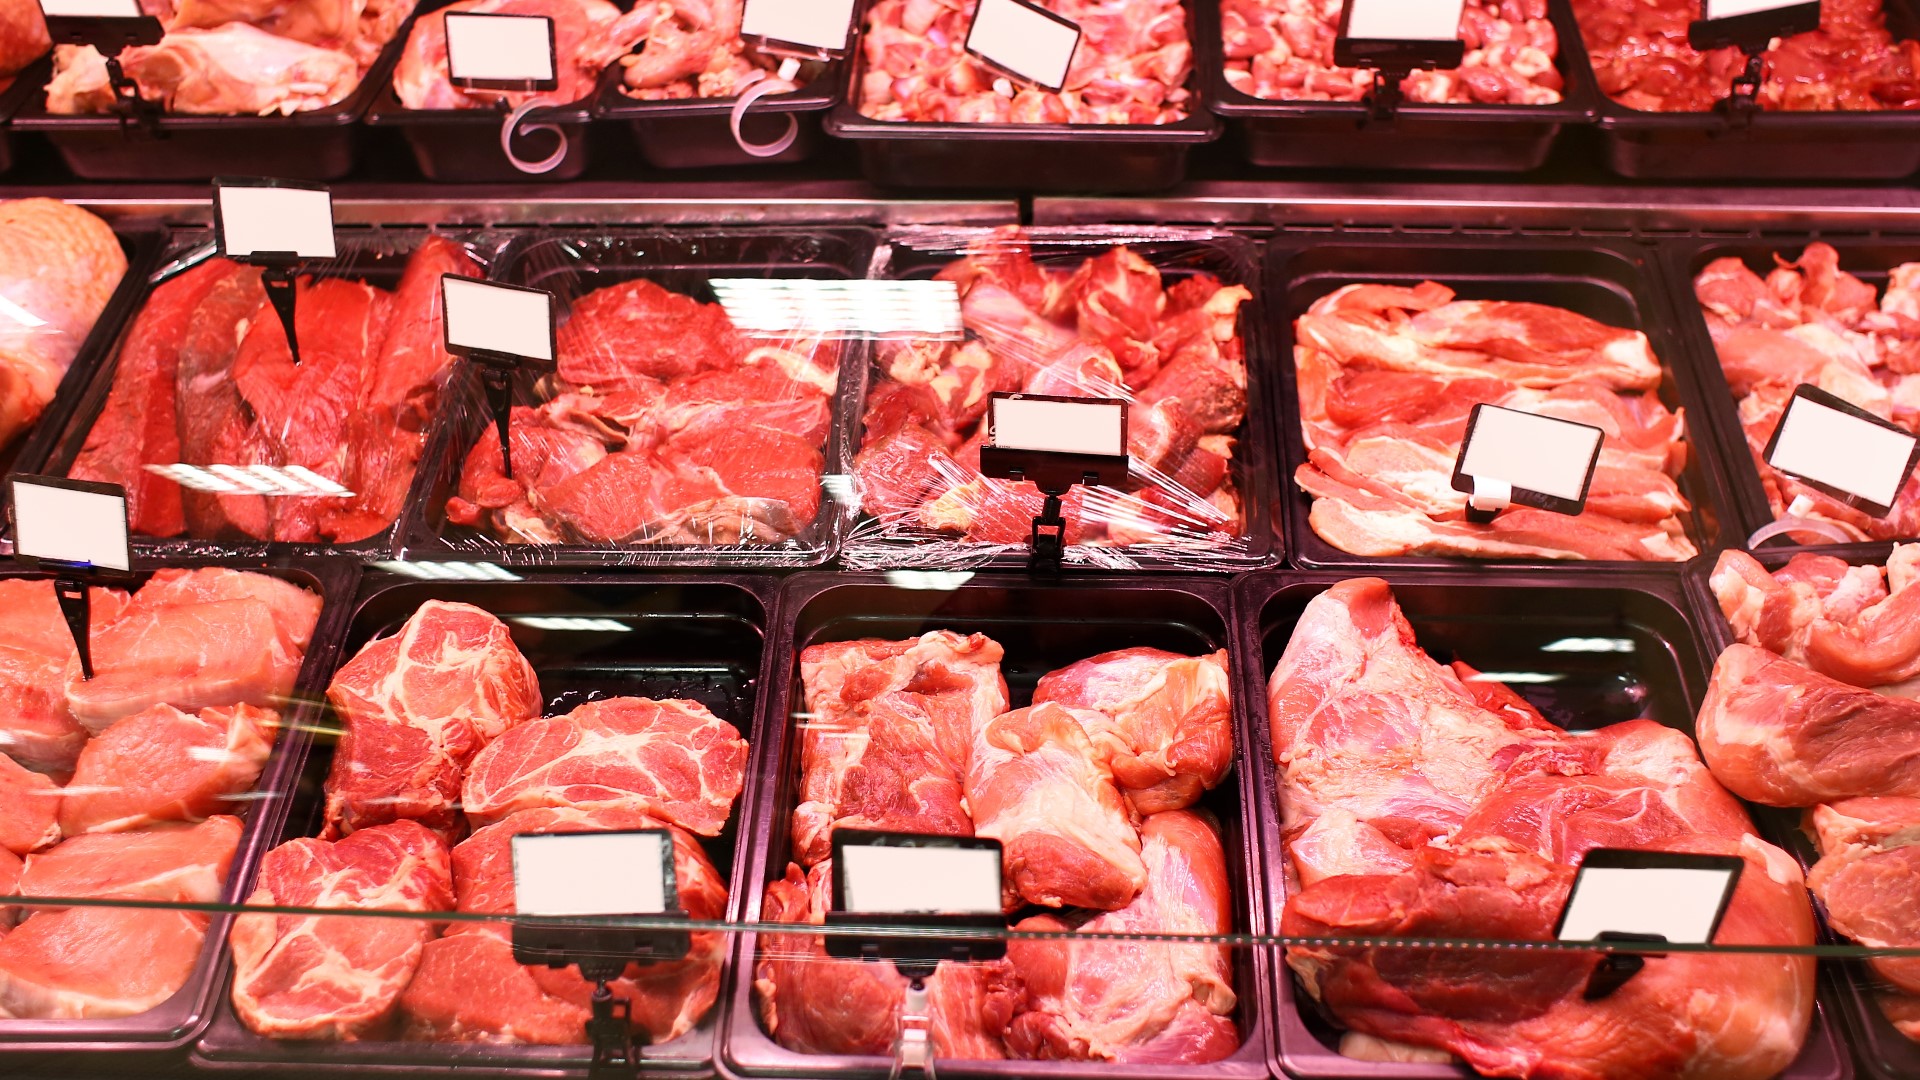 An Ohio State professor said meat prices rose about 7% in 2021.